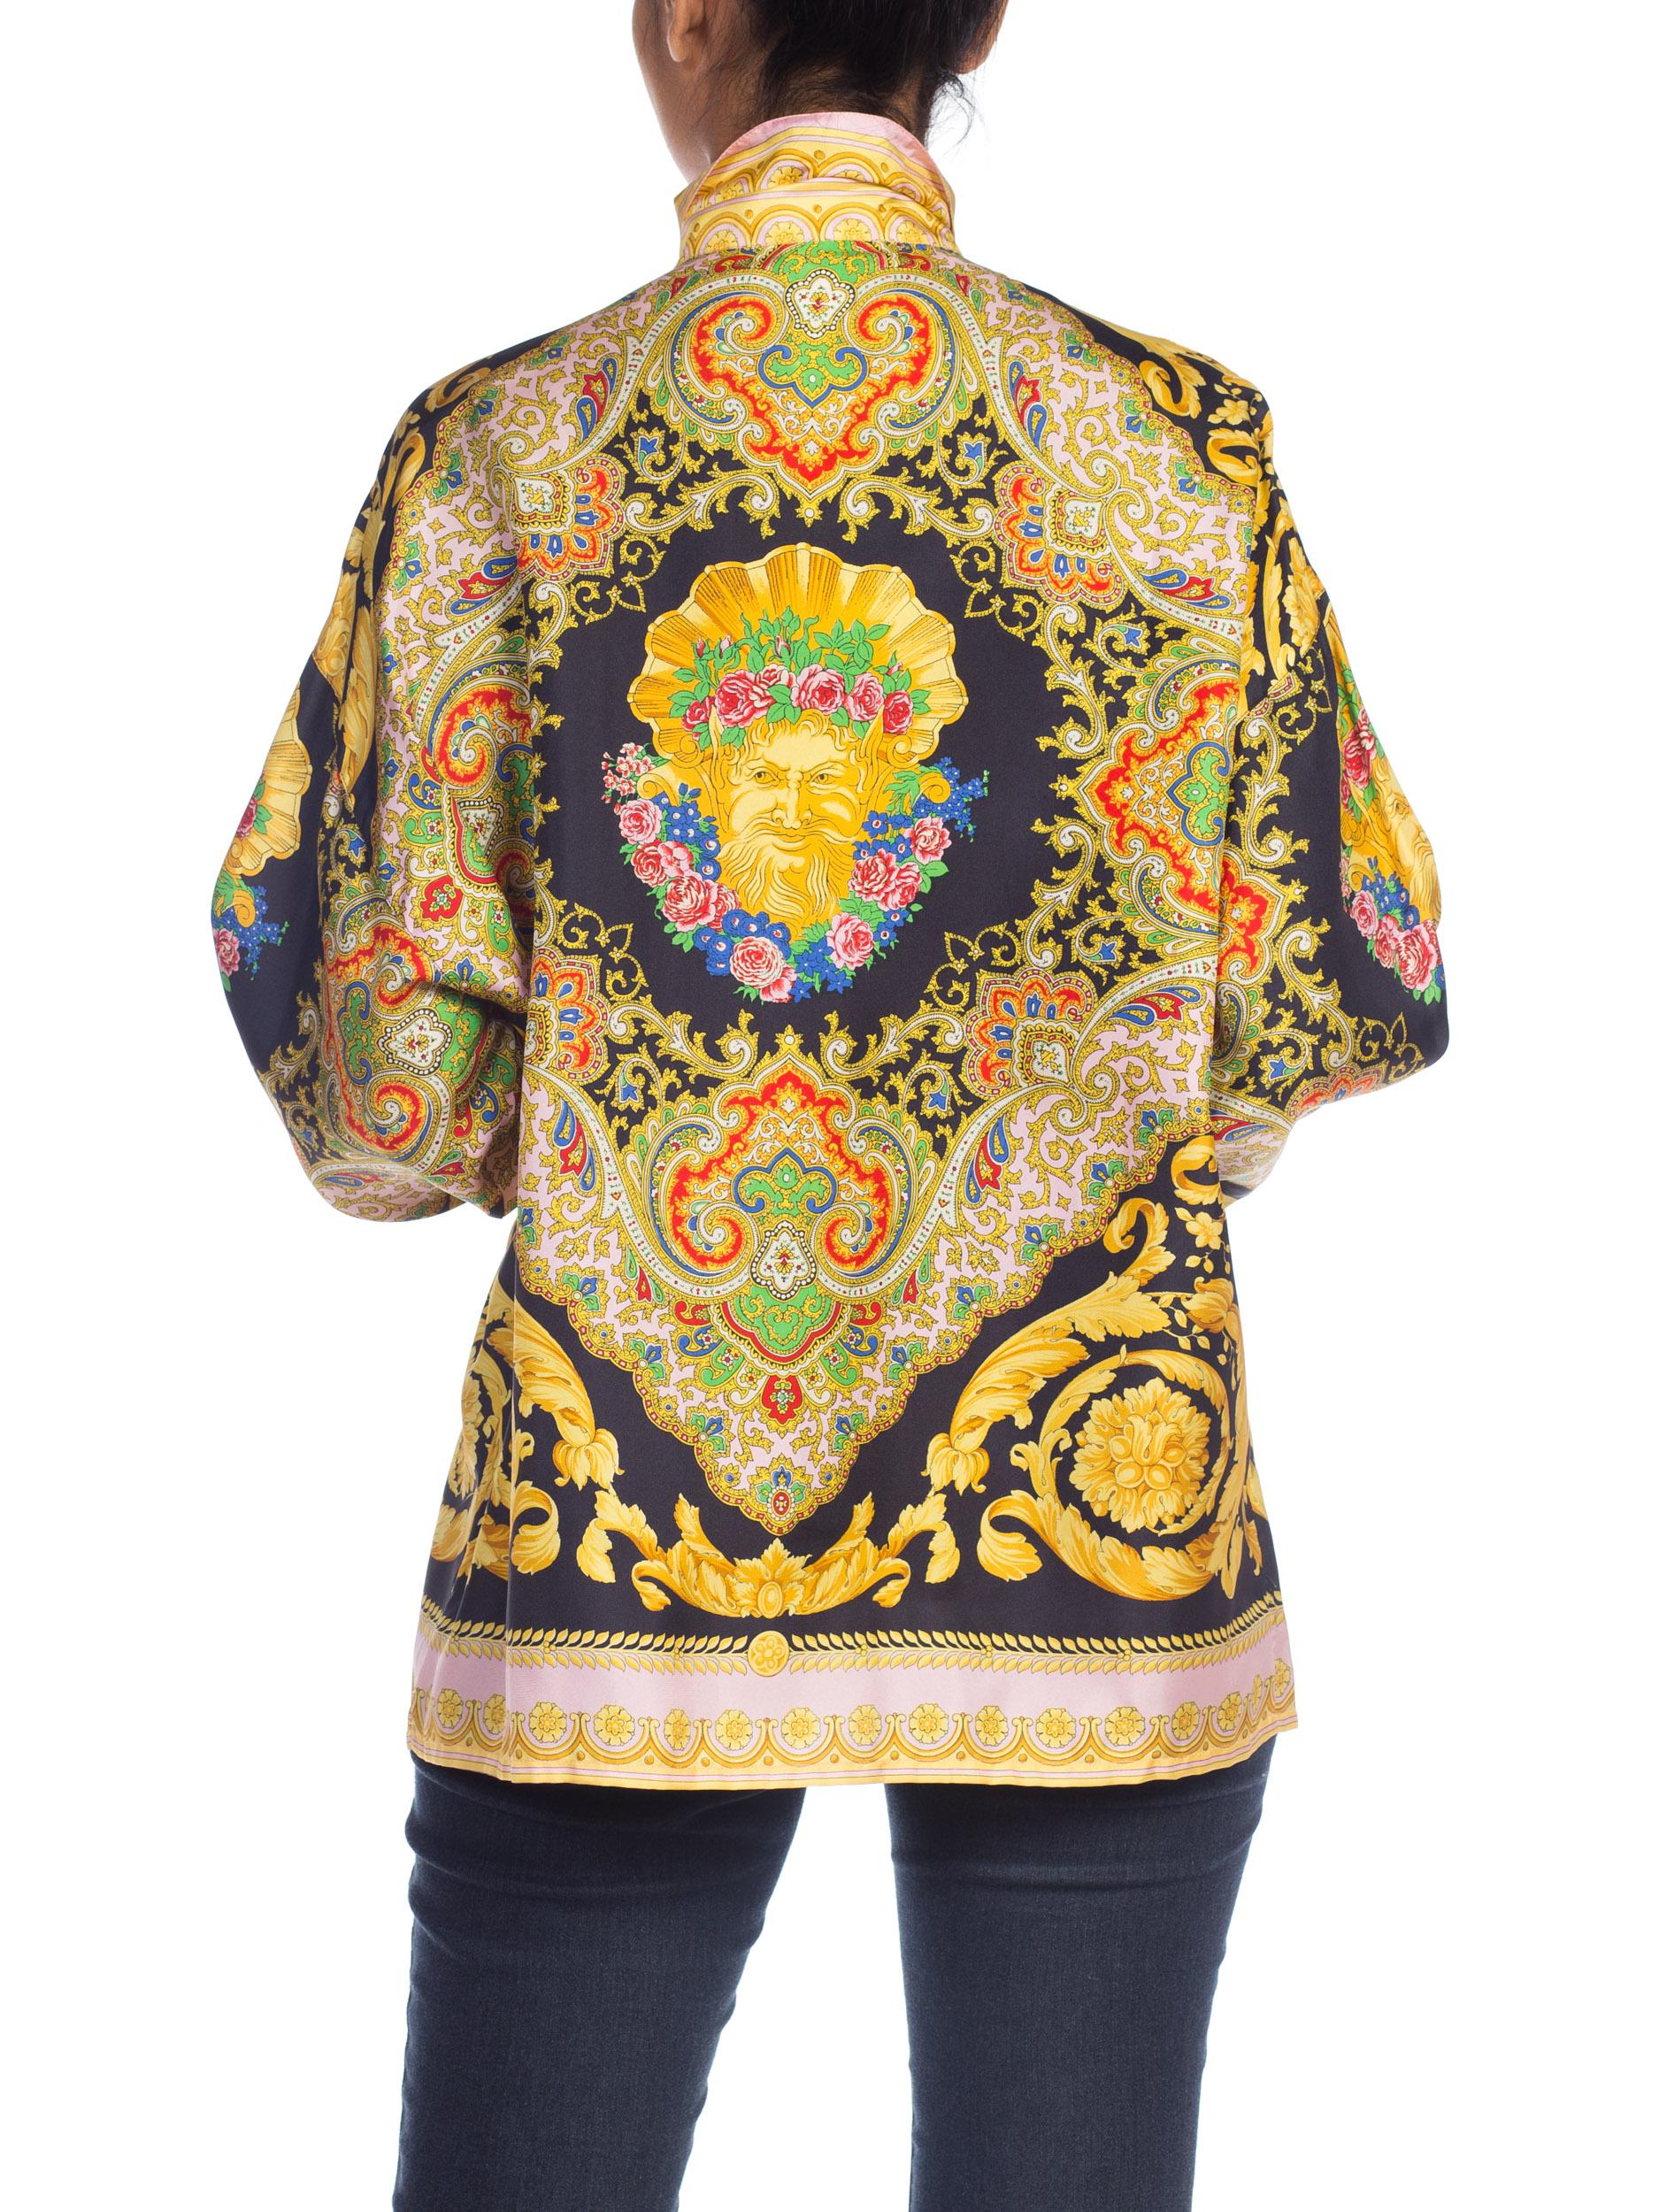 1990s Gianni Versace Baroque Silk Blouse With Giant Gold Buttons 1